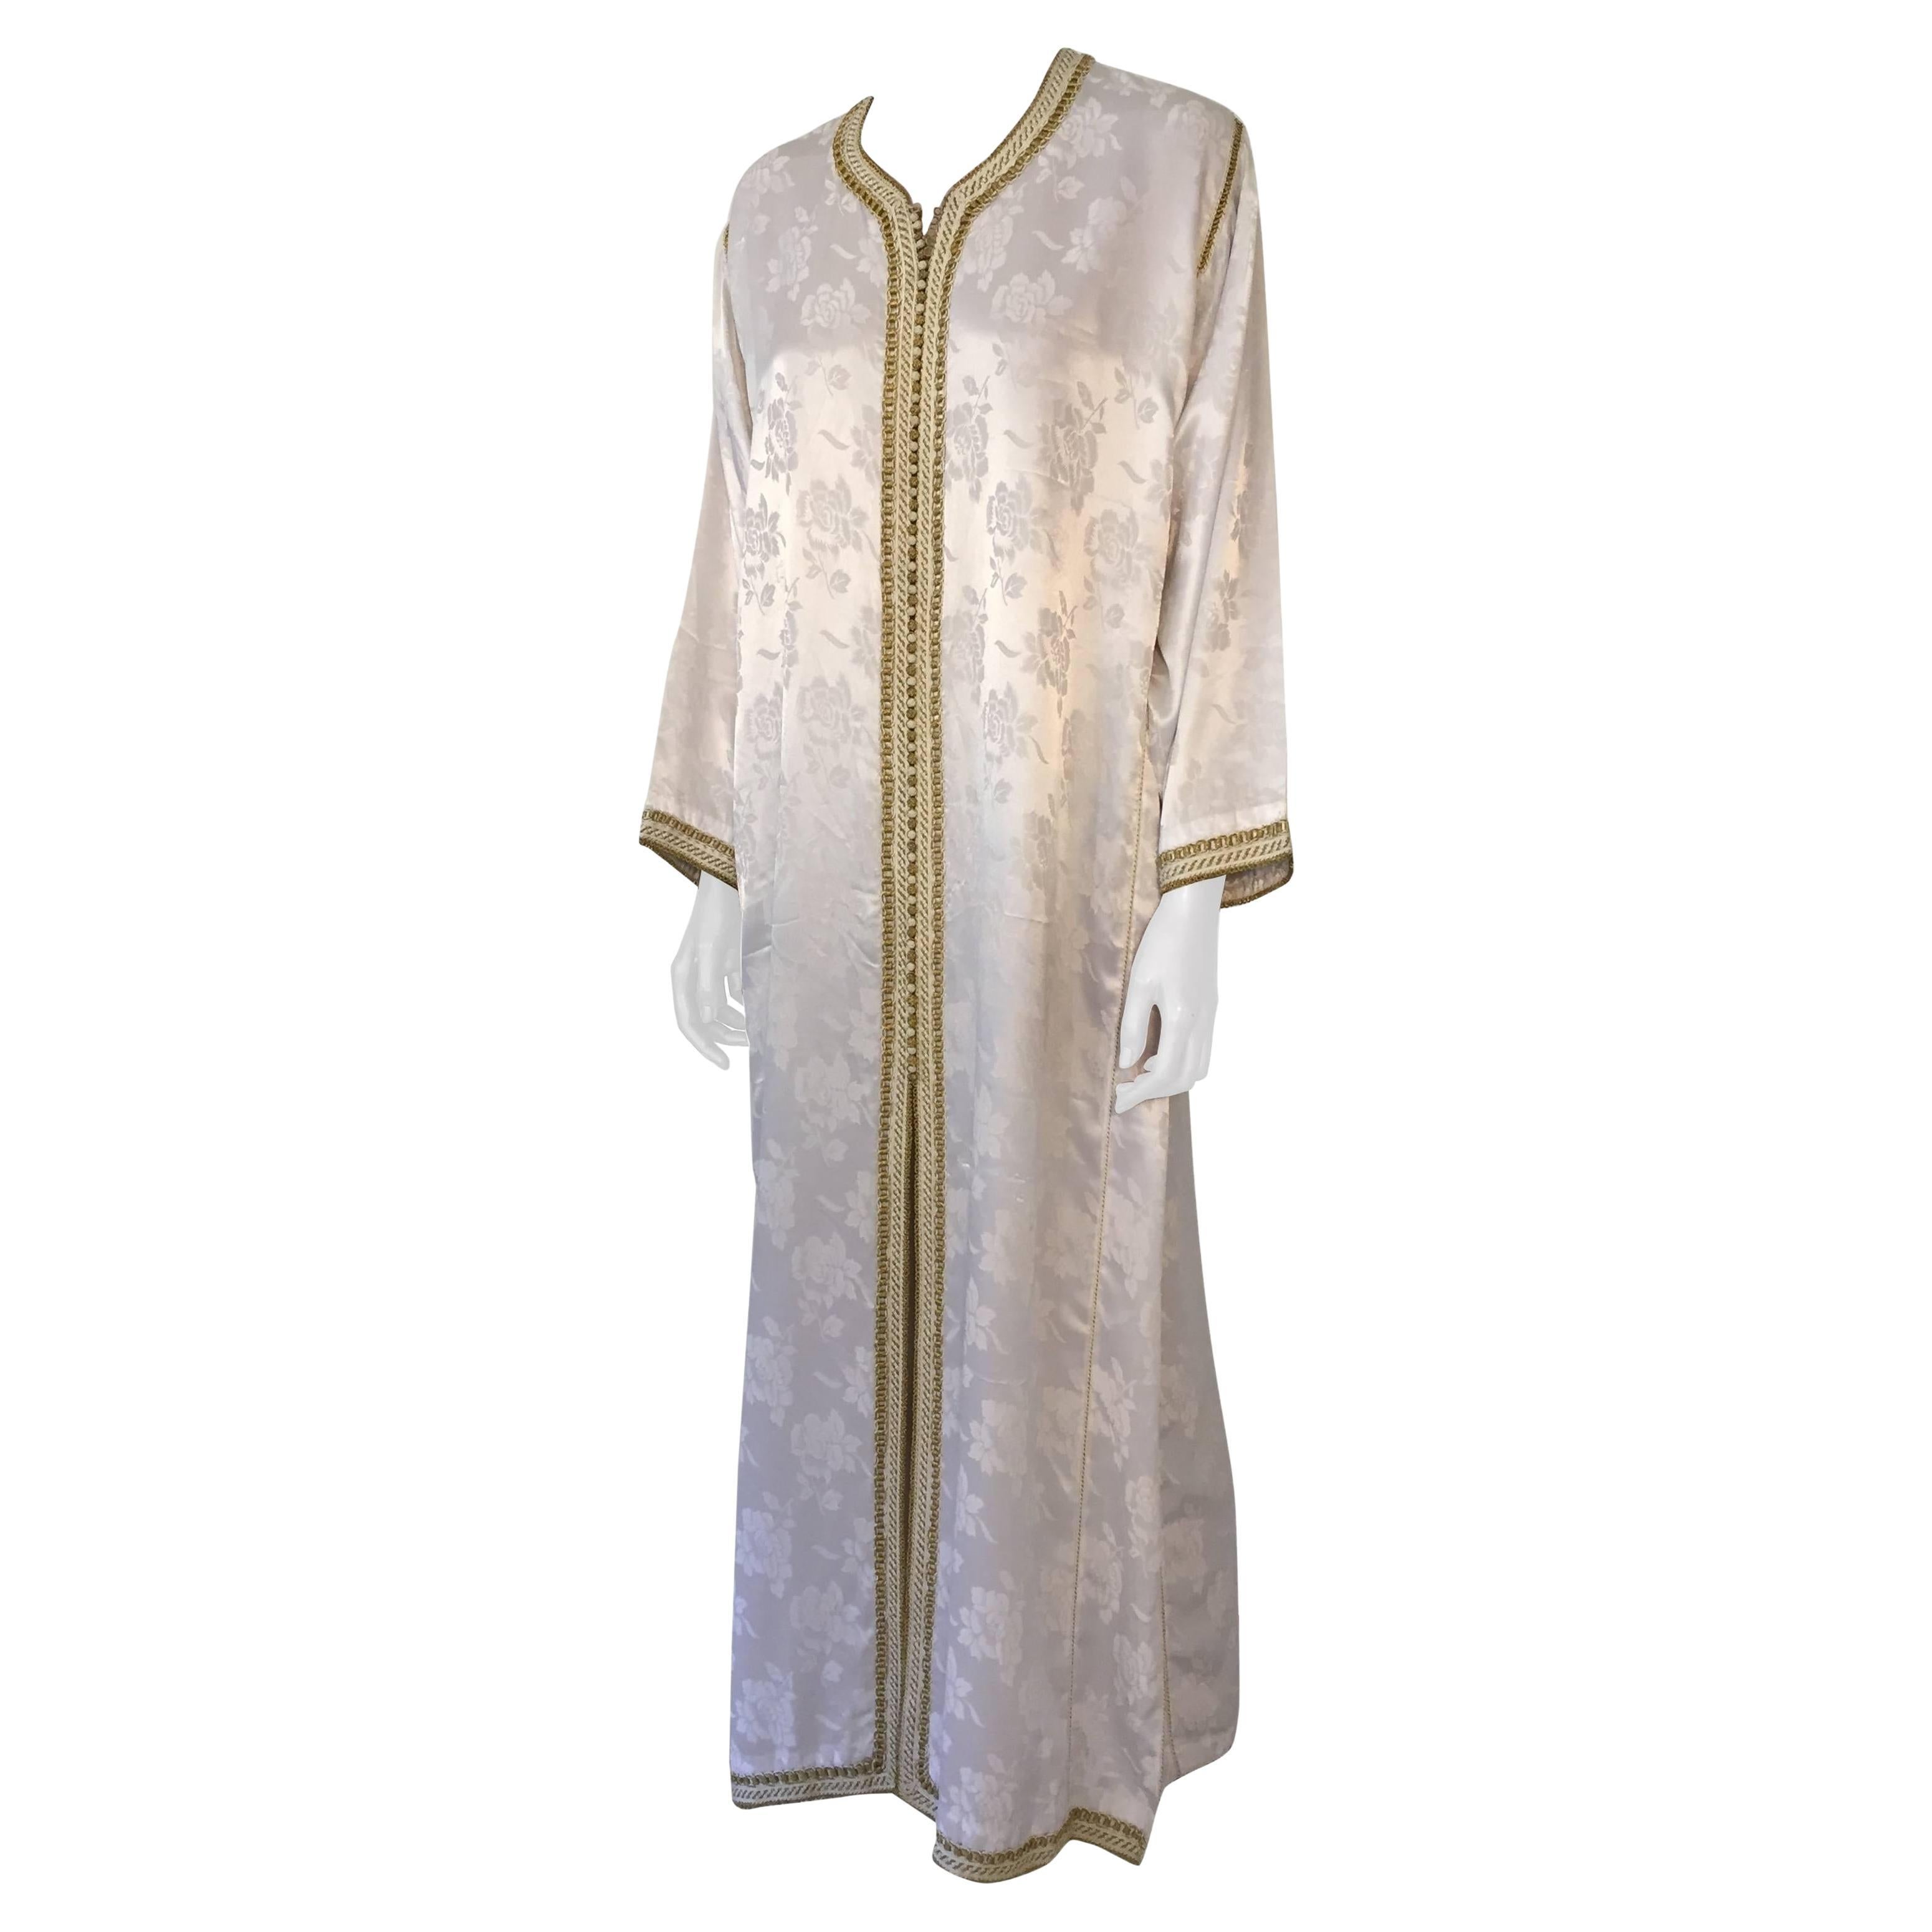 Moroccan Caftan Gown White Embroidered with Gold Trim, circa 1970 For Sale